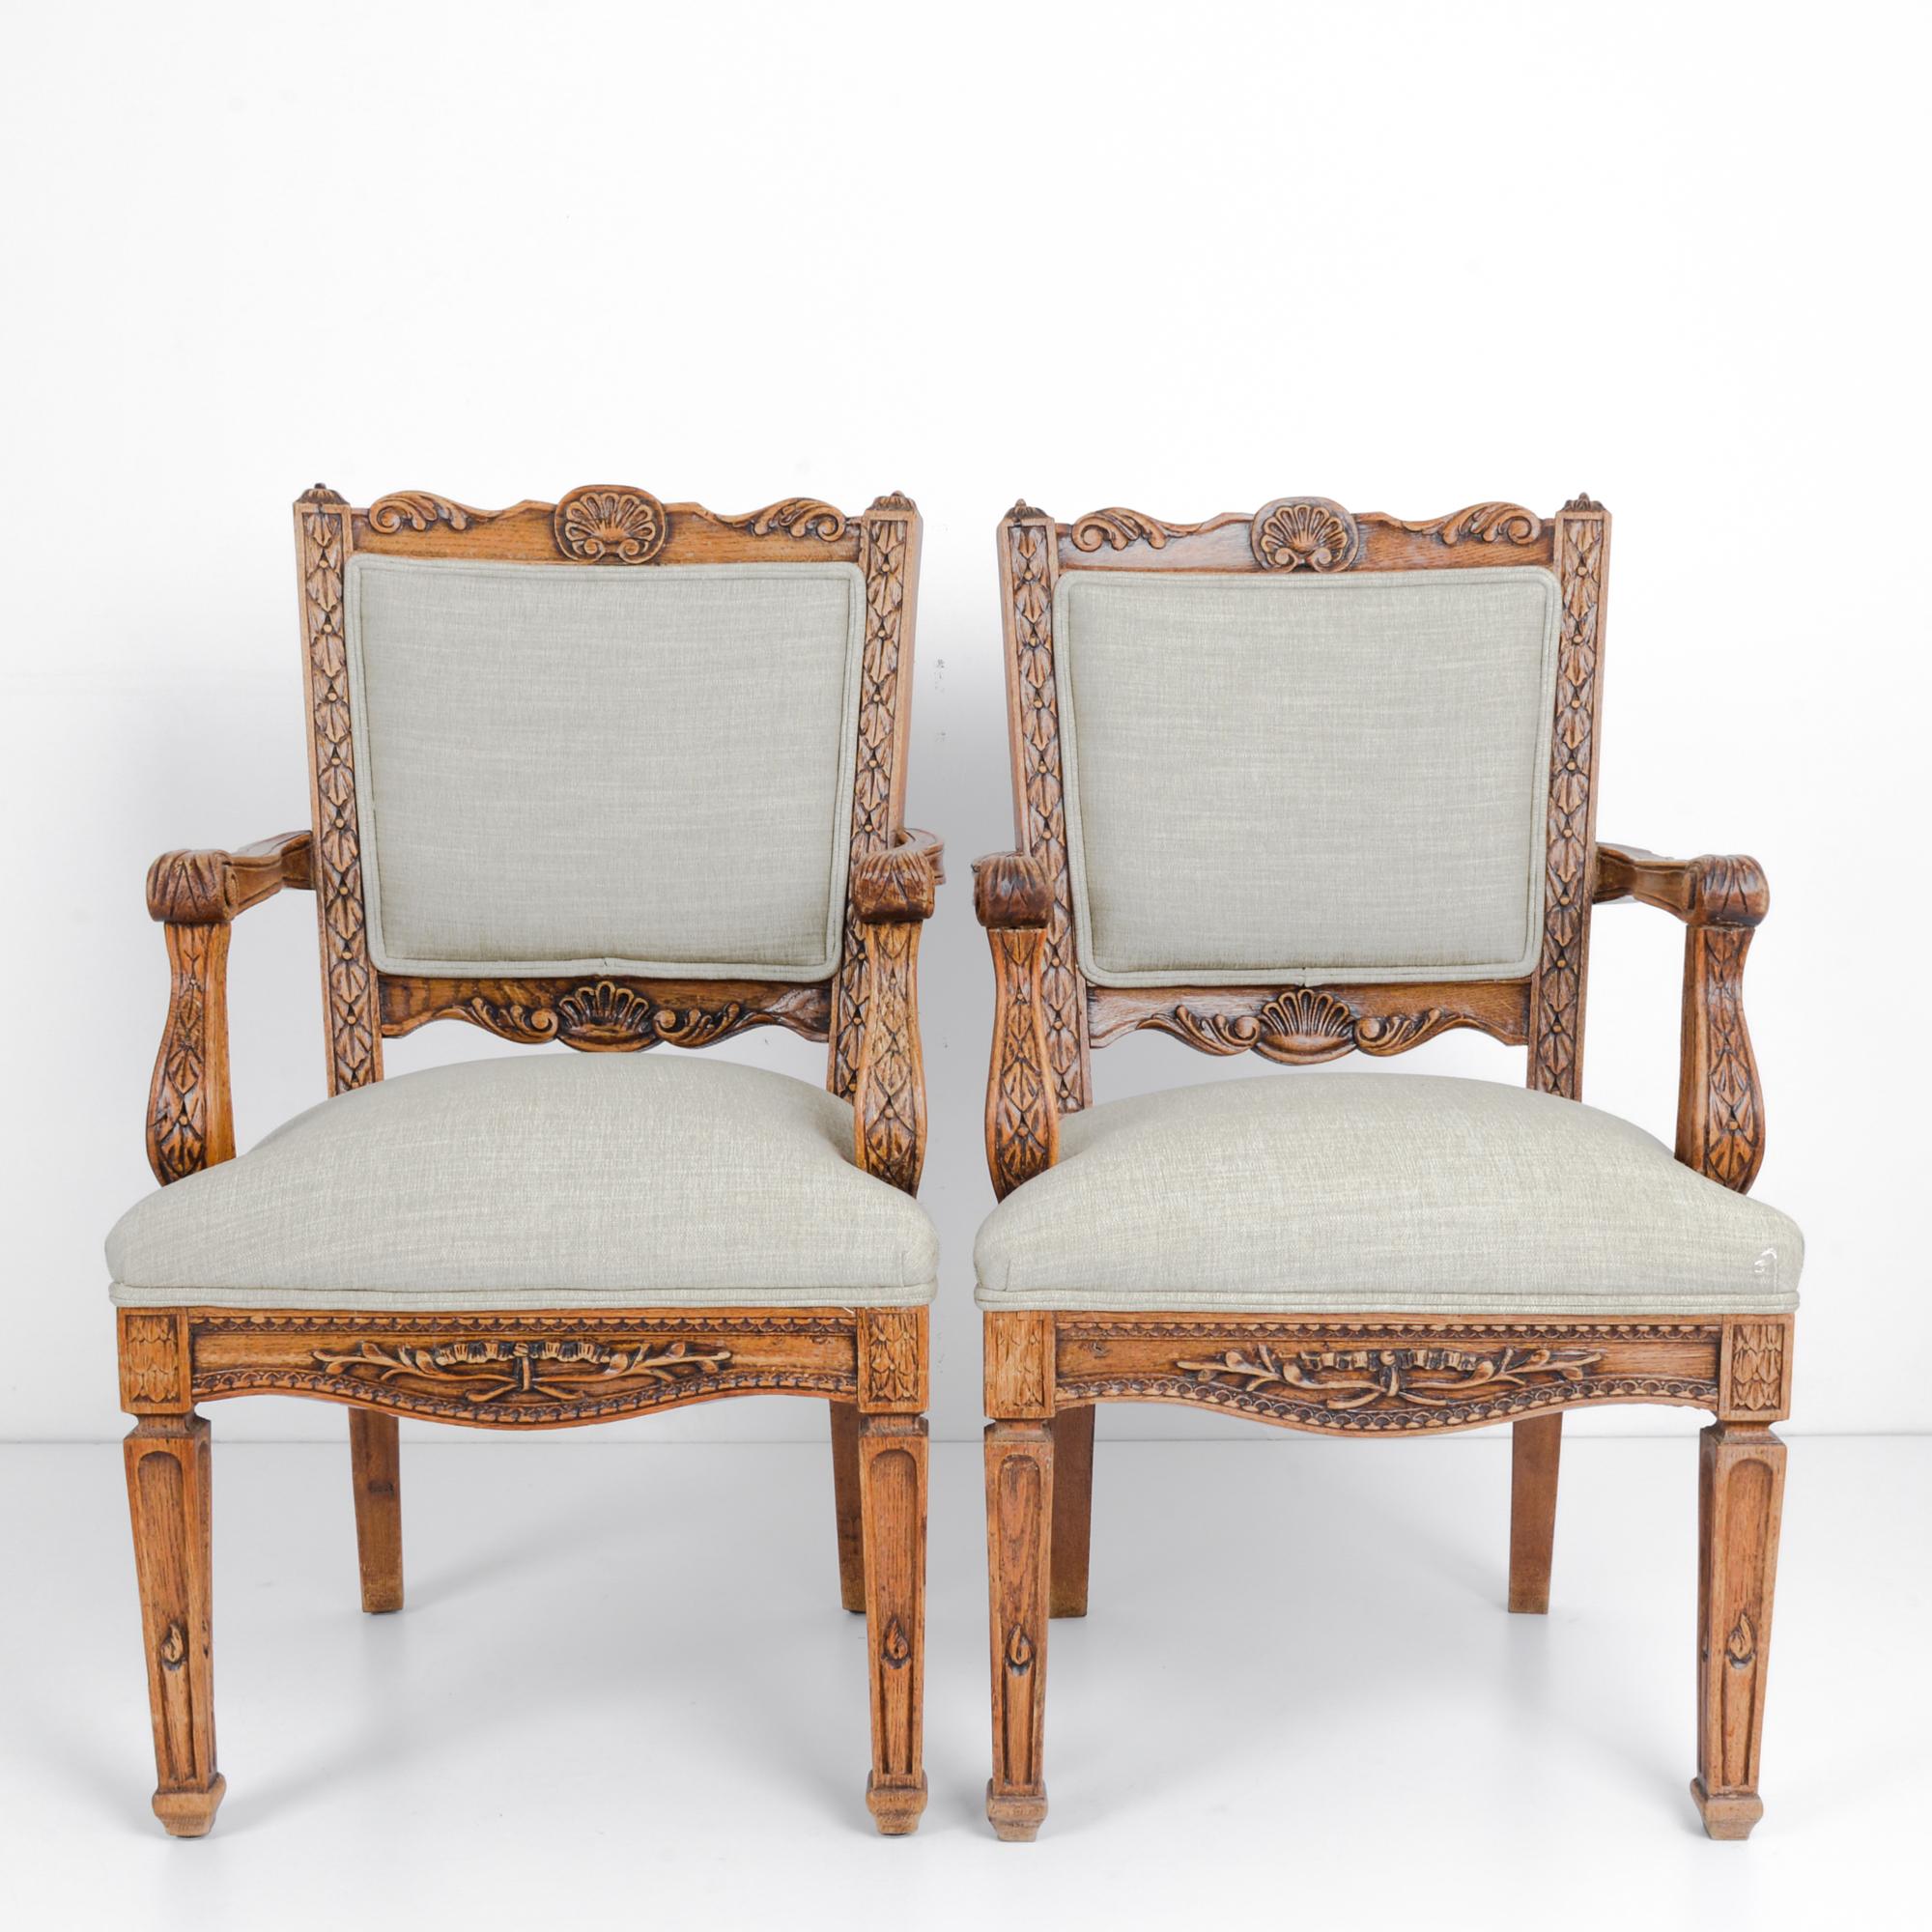 This pair of wooden armchairs was made in Belgium, circa 1910. The chairs have been renewed with a comfortable upholstered seat and back. With the patterned and decorative carvings of foliage and scallop shells, the chairs will infuse a sense of